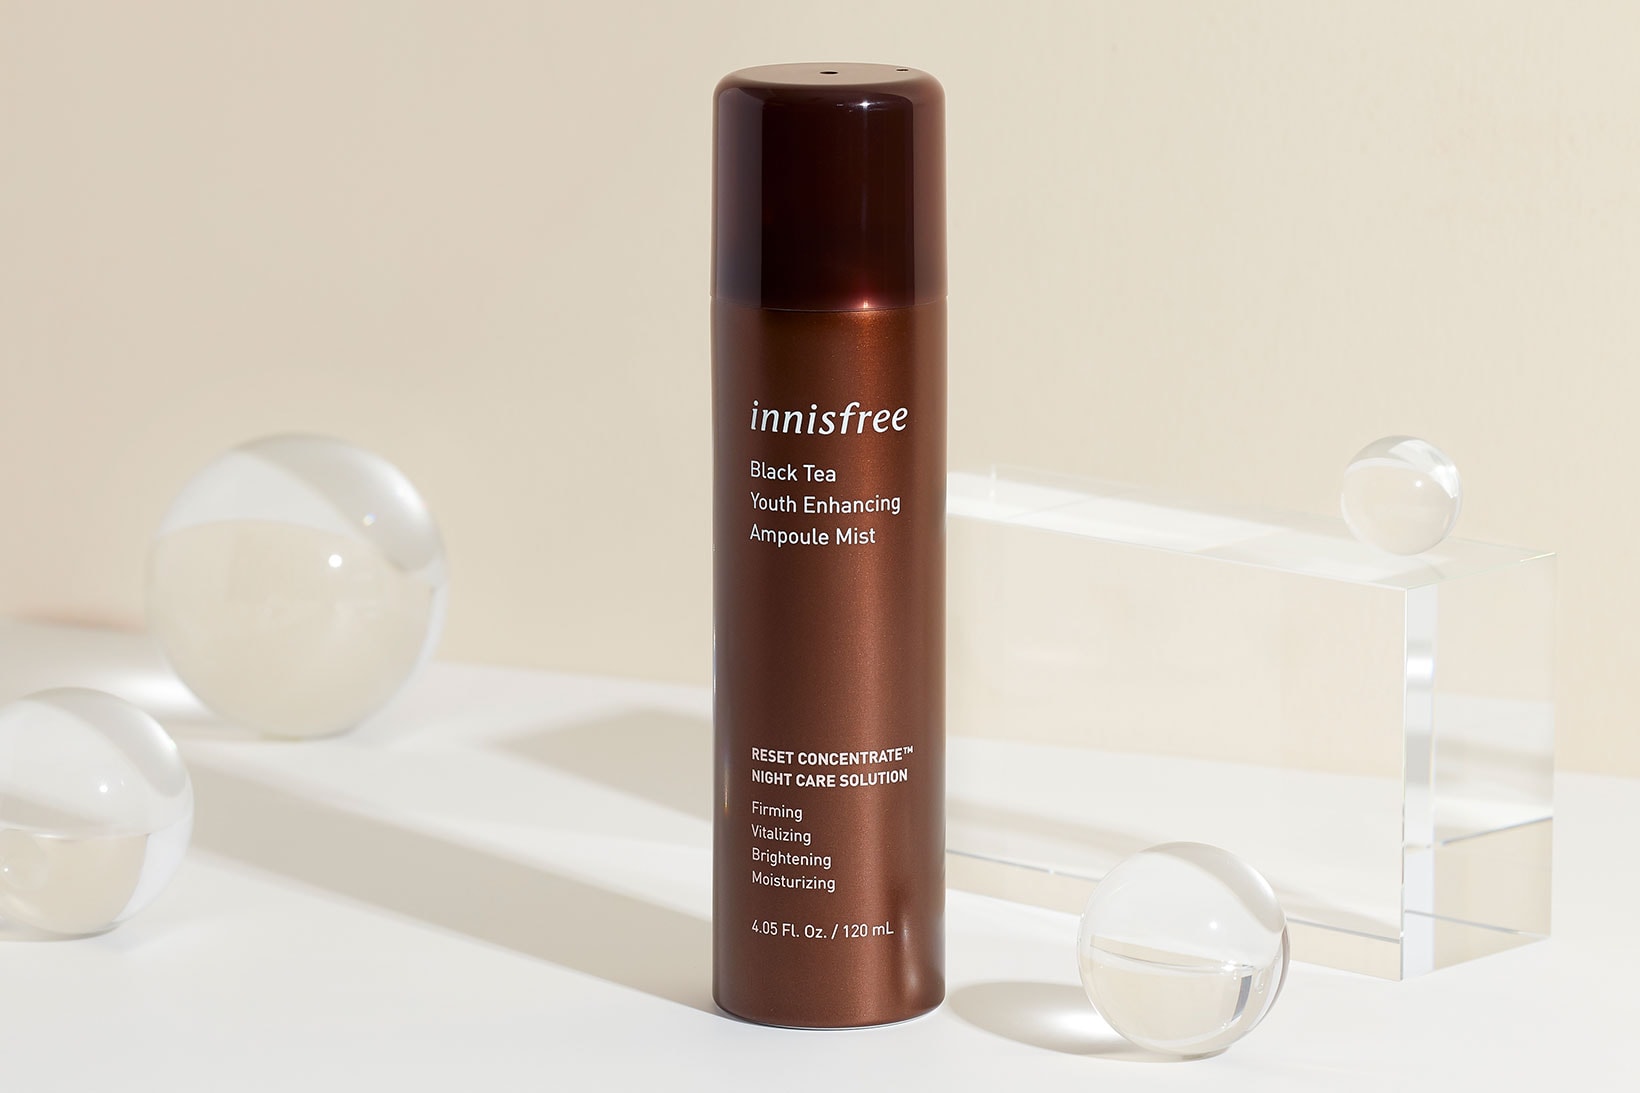 innisfree black tea youth enhancing line products collection k-beauty skincare face mist